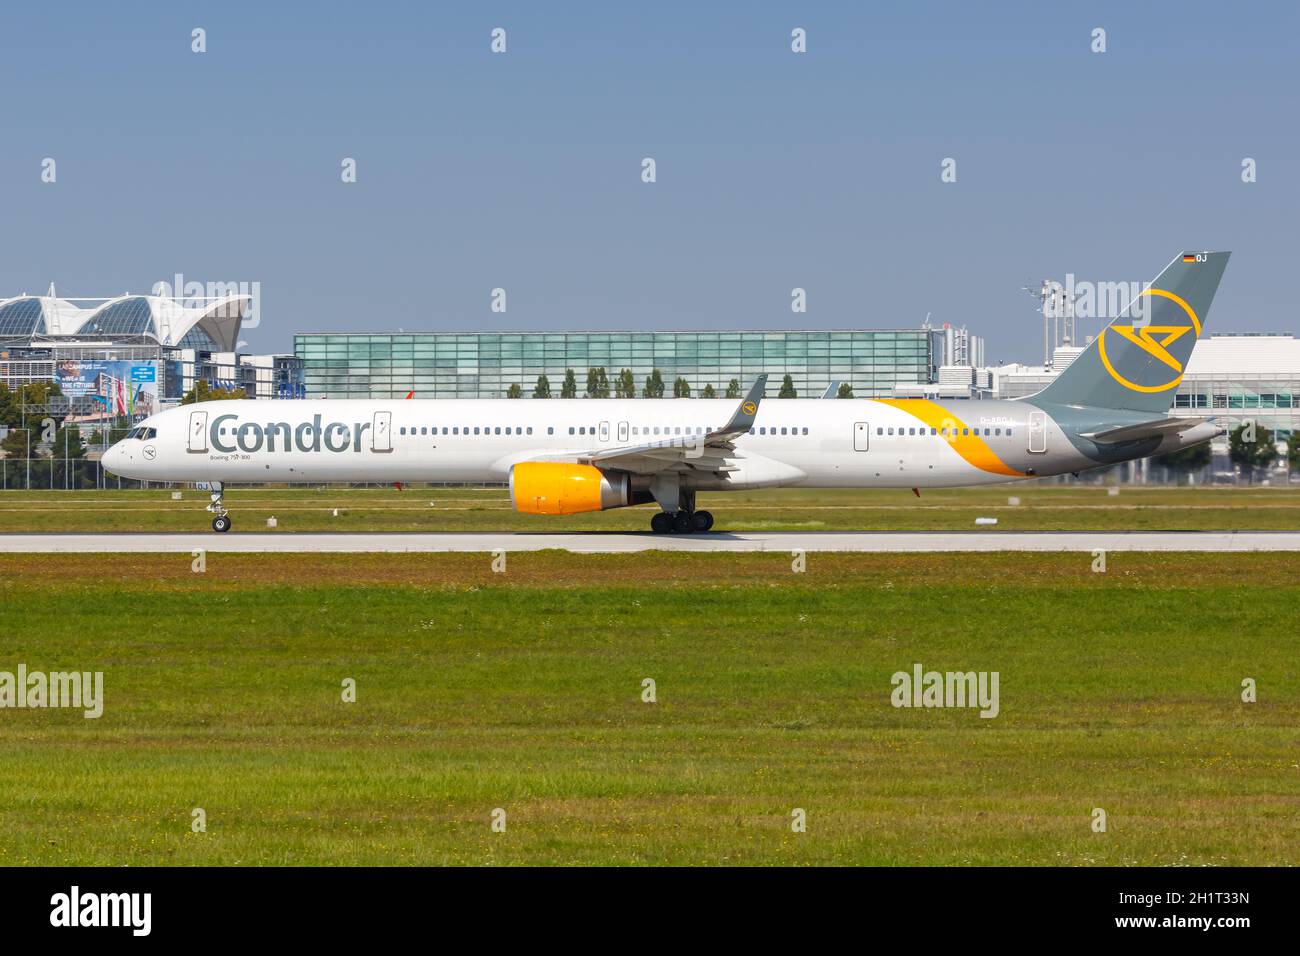 Munich, Germany - September 9, 2021: Condor Boeing 757-300 airplane at Munich airport (MUC) in Germany. Stock Photo